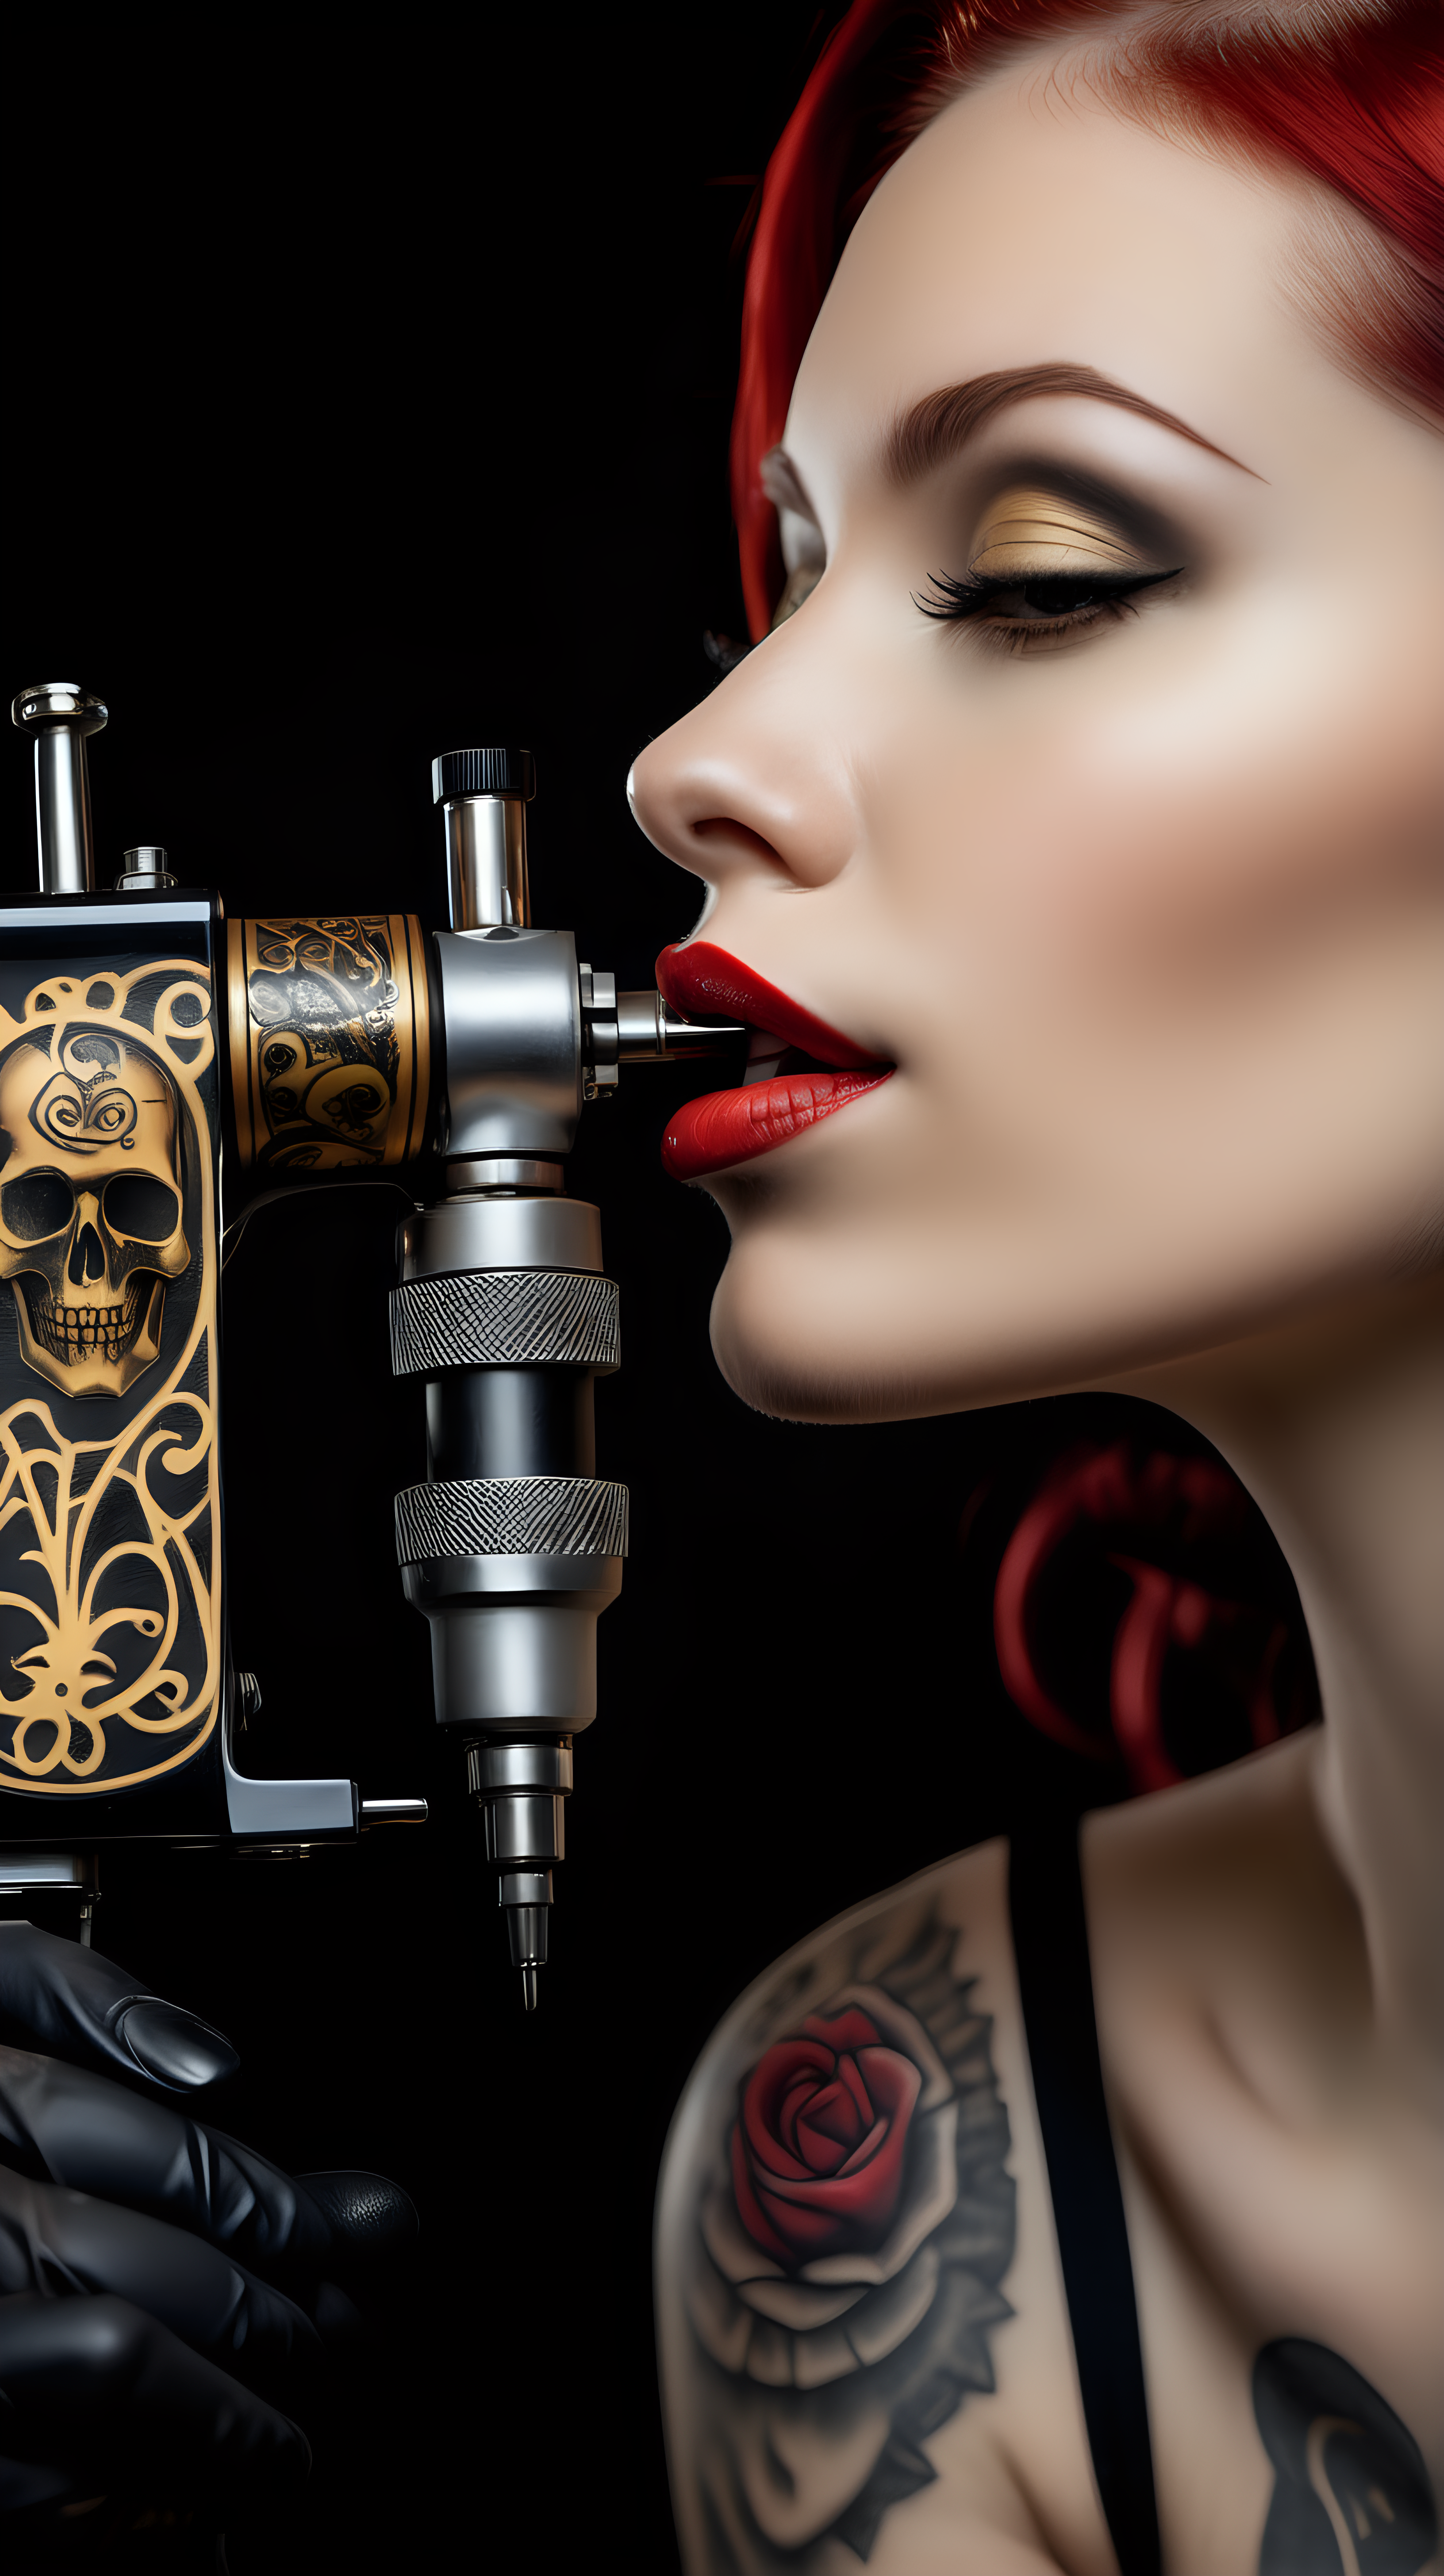 /imagine prompt : An ultra-realistic photograph captured with a canon 5d mark III camera, equipped with an macro lens at F 5.8 aperture setting, The camera is directly in front of the subject, capturing a vintage classic tattoo machine /describe : a pattern of the skull is engraved on golden tattoo grip , grabbed by a hand wearing black nitrile gloves . A beautiful woman whose only lips are visible in the picture is sensually kissing the handle of the tattoo machine with her very red lips.
the hand is blurred and the focus sets on tattoo machine .
Soft spot light gracefully illuminates the subject and golden grip is shining. The background is absolutely black , highlighting the subject.
The image, shot in high resolution and a 16:9 aspect ratio, captures the subject’s  with stunning realism –ar 9:16 –v 5.2 –style raw
